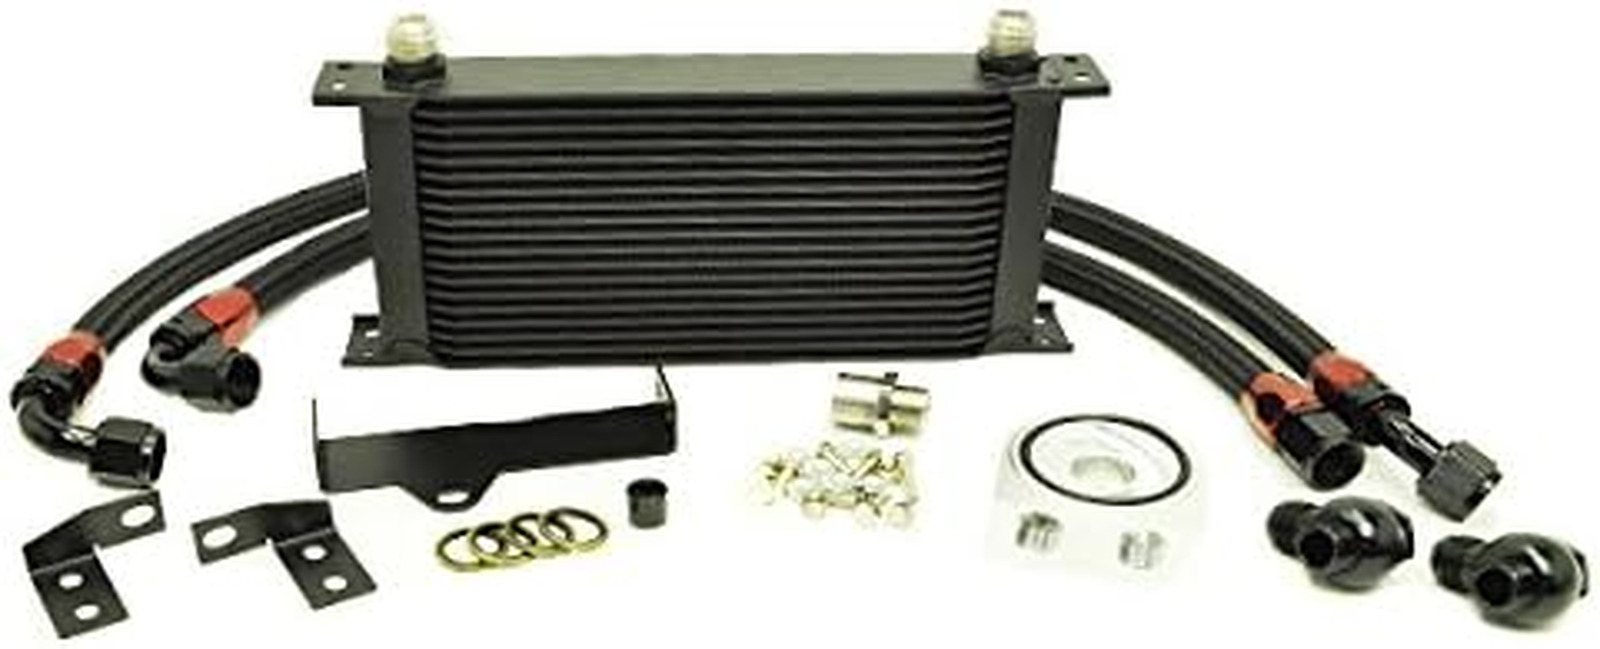 OCK-1092 19 Row Core Oil Cooler Kit; Bolt on Upgrade; Compatible with Subaru Imp